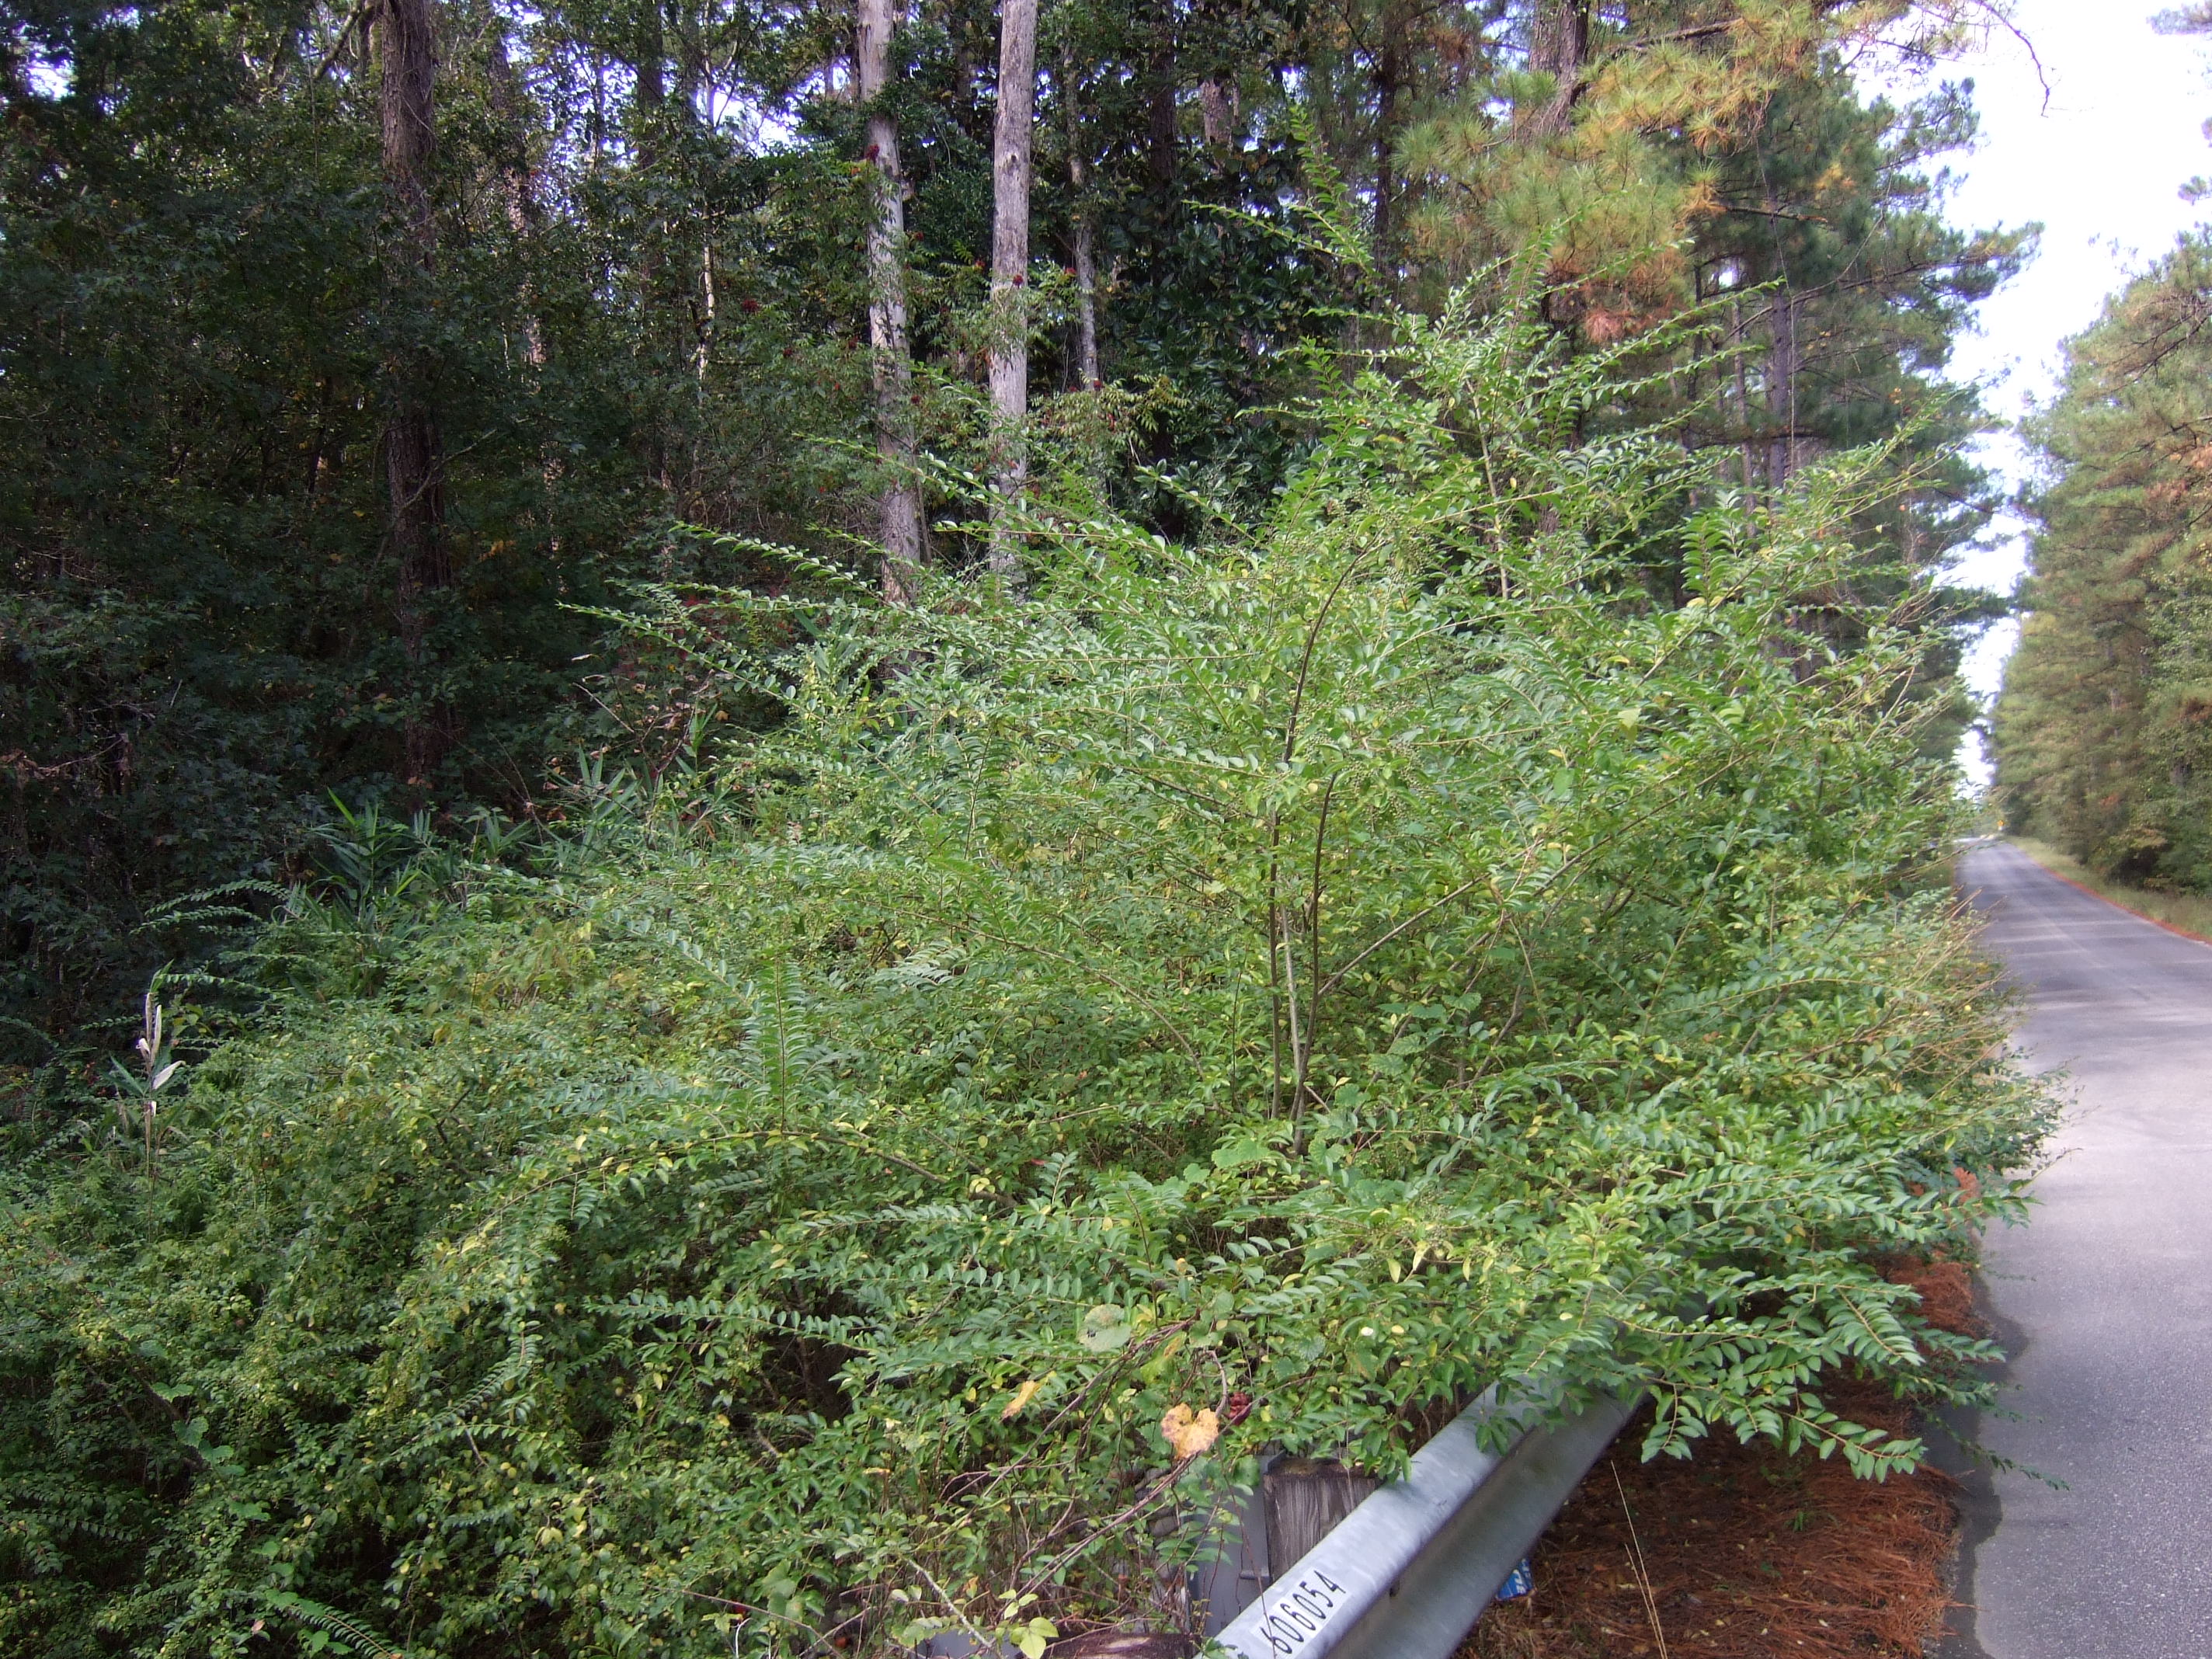 Typical growth form of Chinese privet.